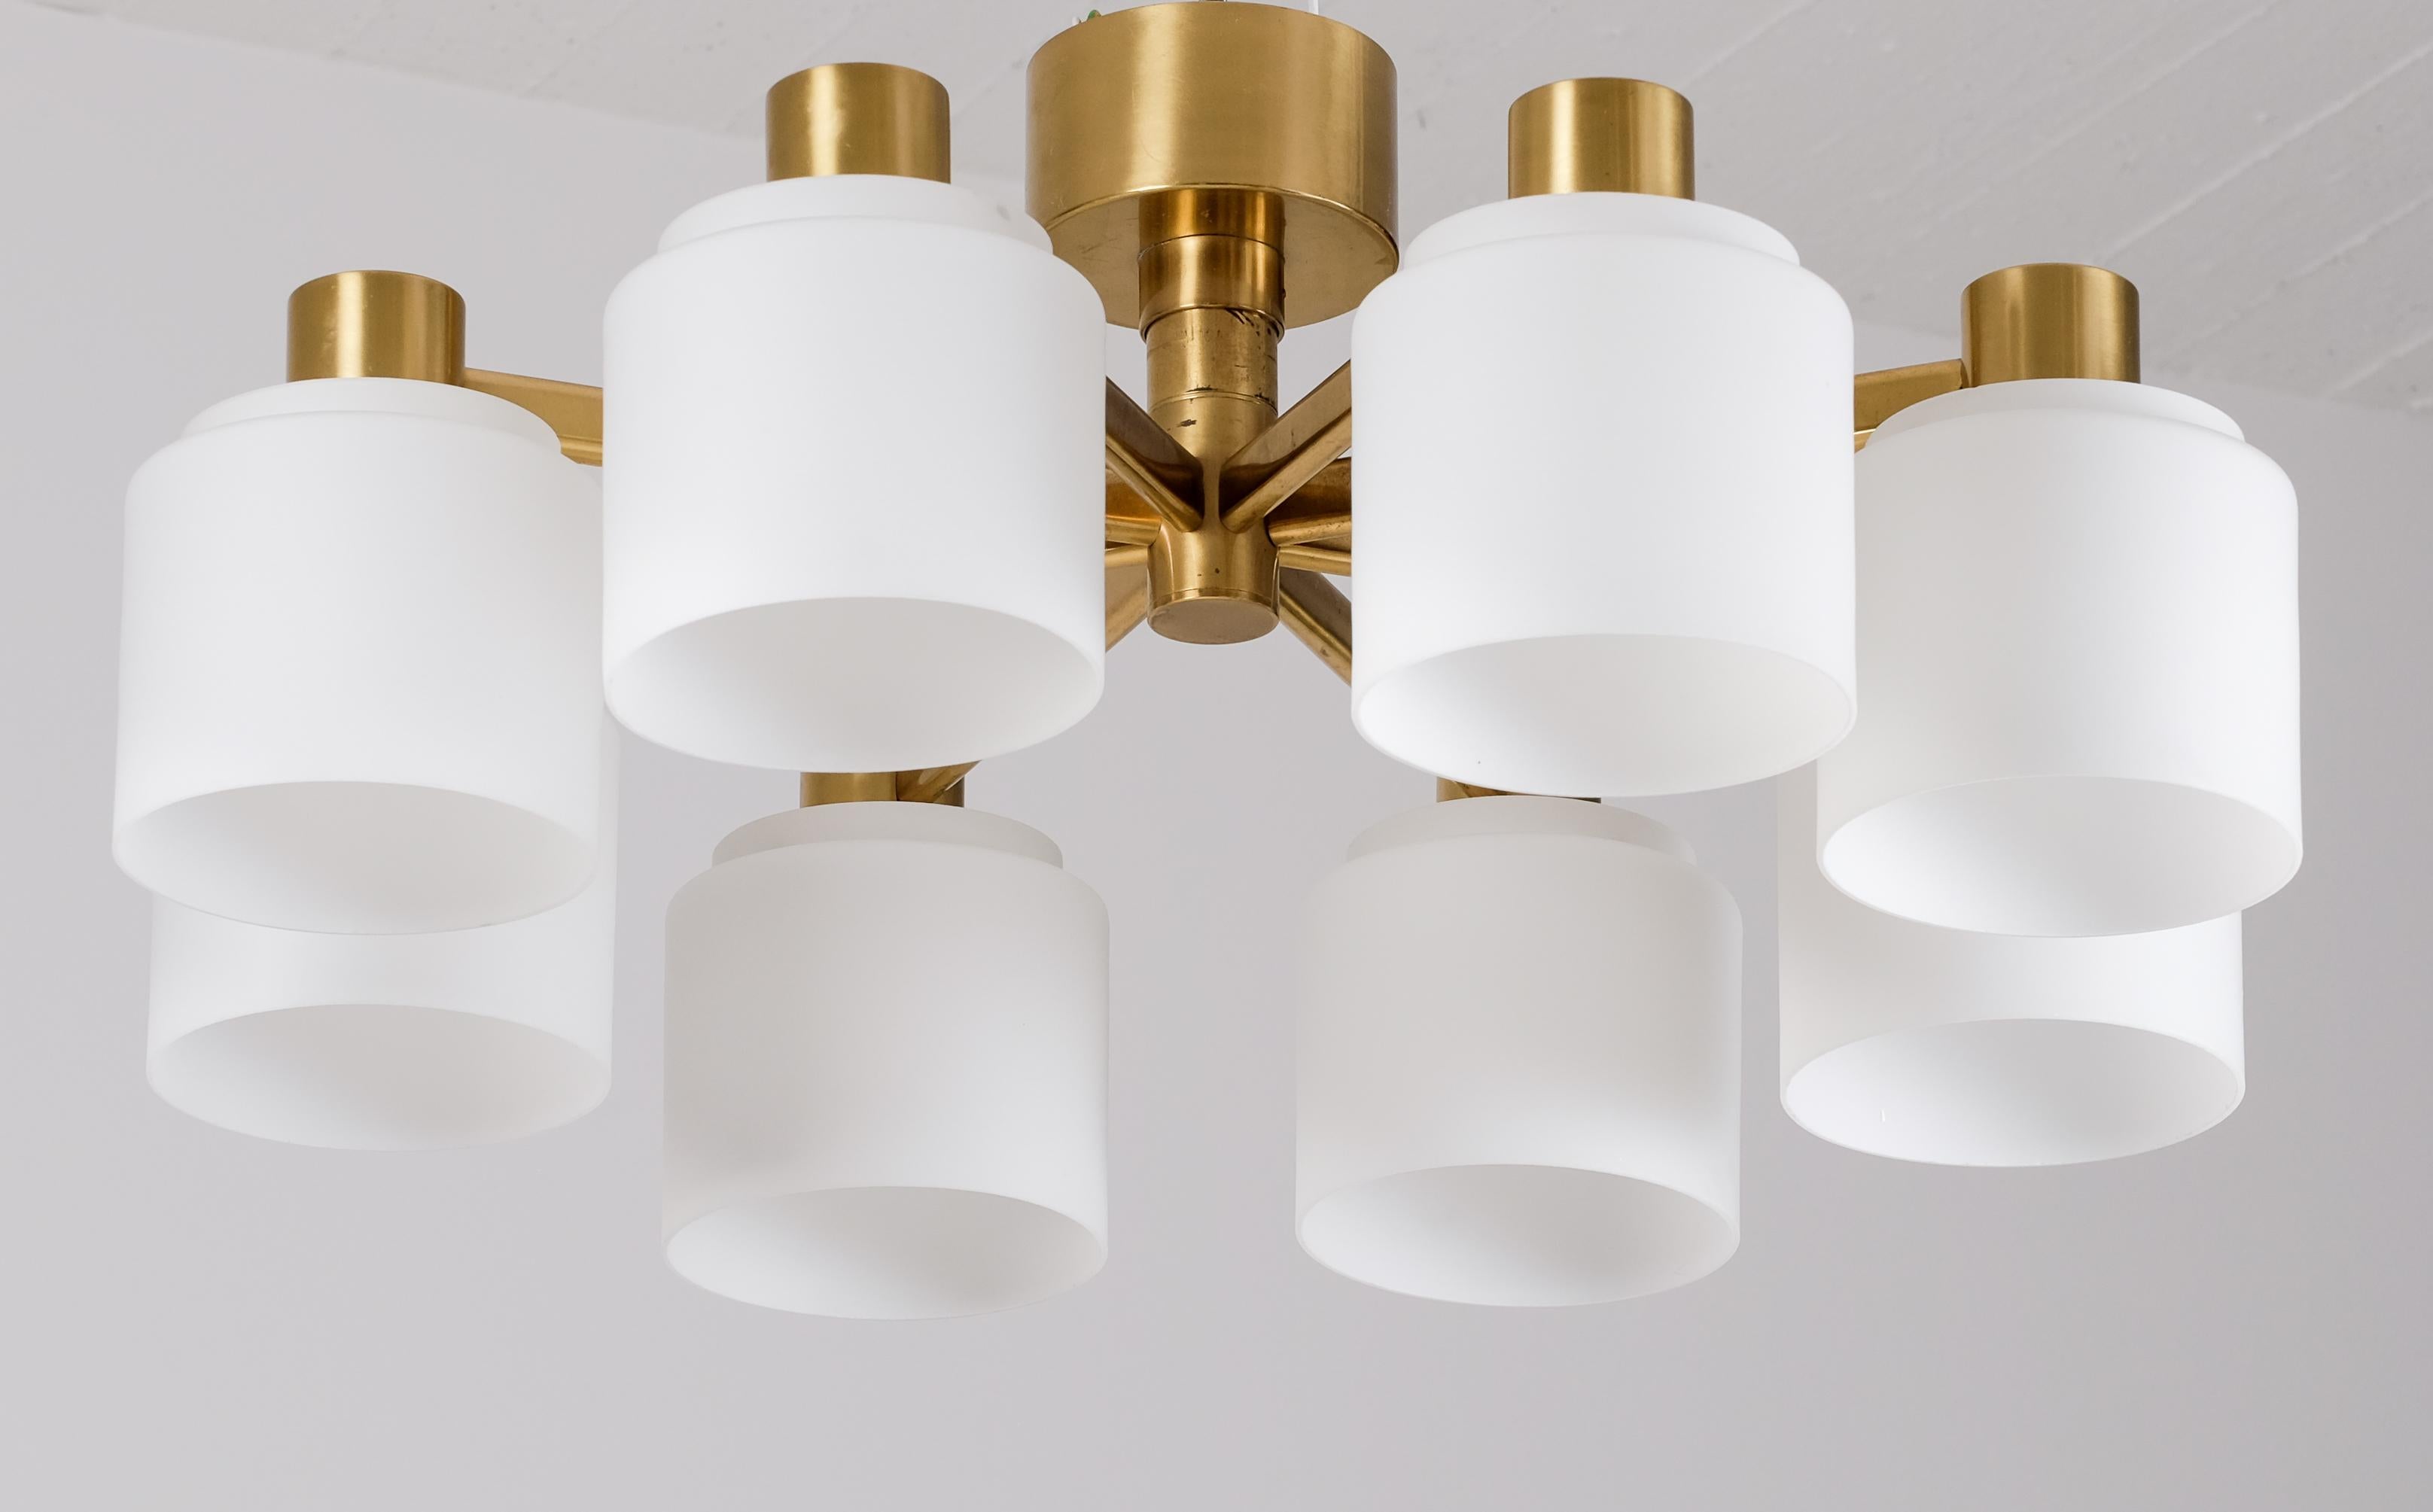 Set of 3 Swedish Ceiling Lights by Boréns, Sweden, 1960s For Sale 3